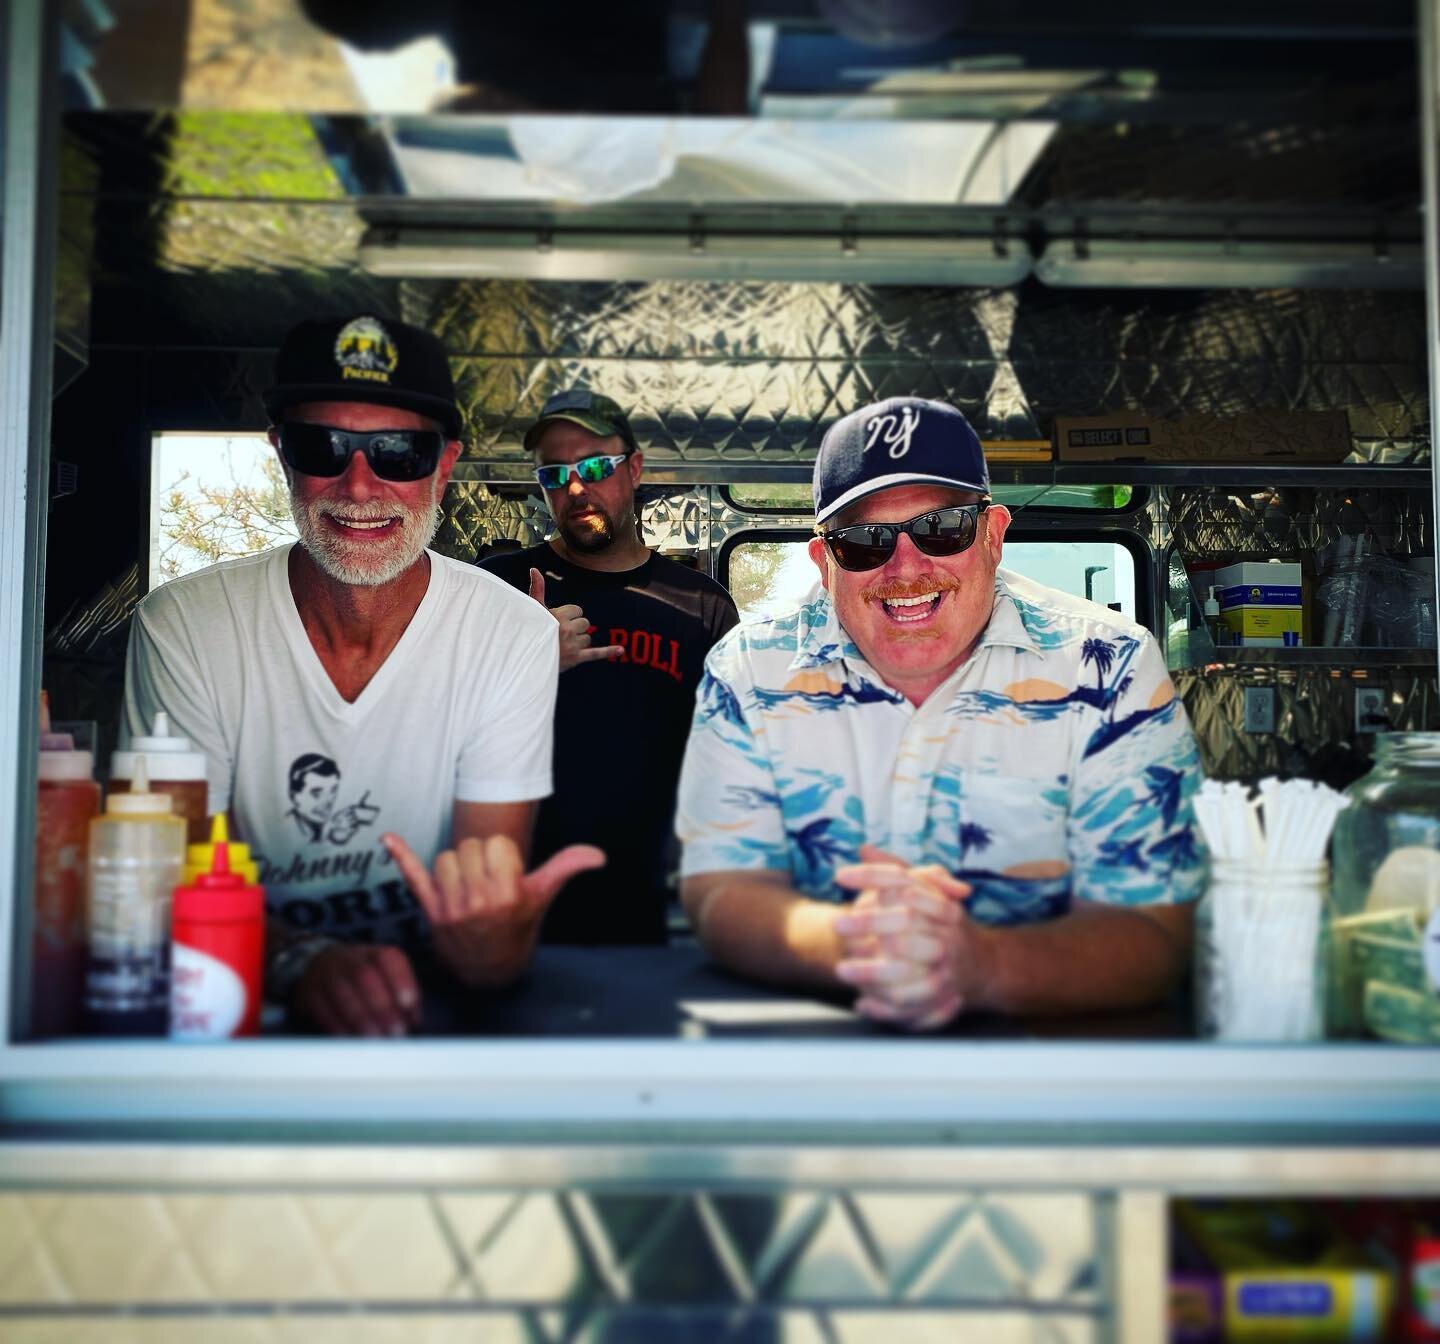 Hanging #PorkRollTruck Style in #AsburyPark &hellip; Oink @iamhusky4life Big Ups Man - you rock for popping by today &hellip;
#JohnnyPorkRoll